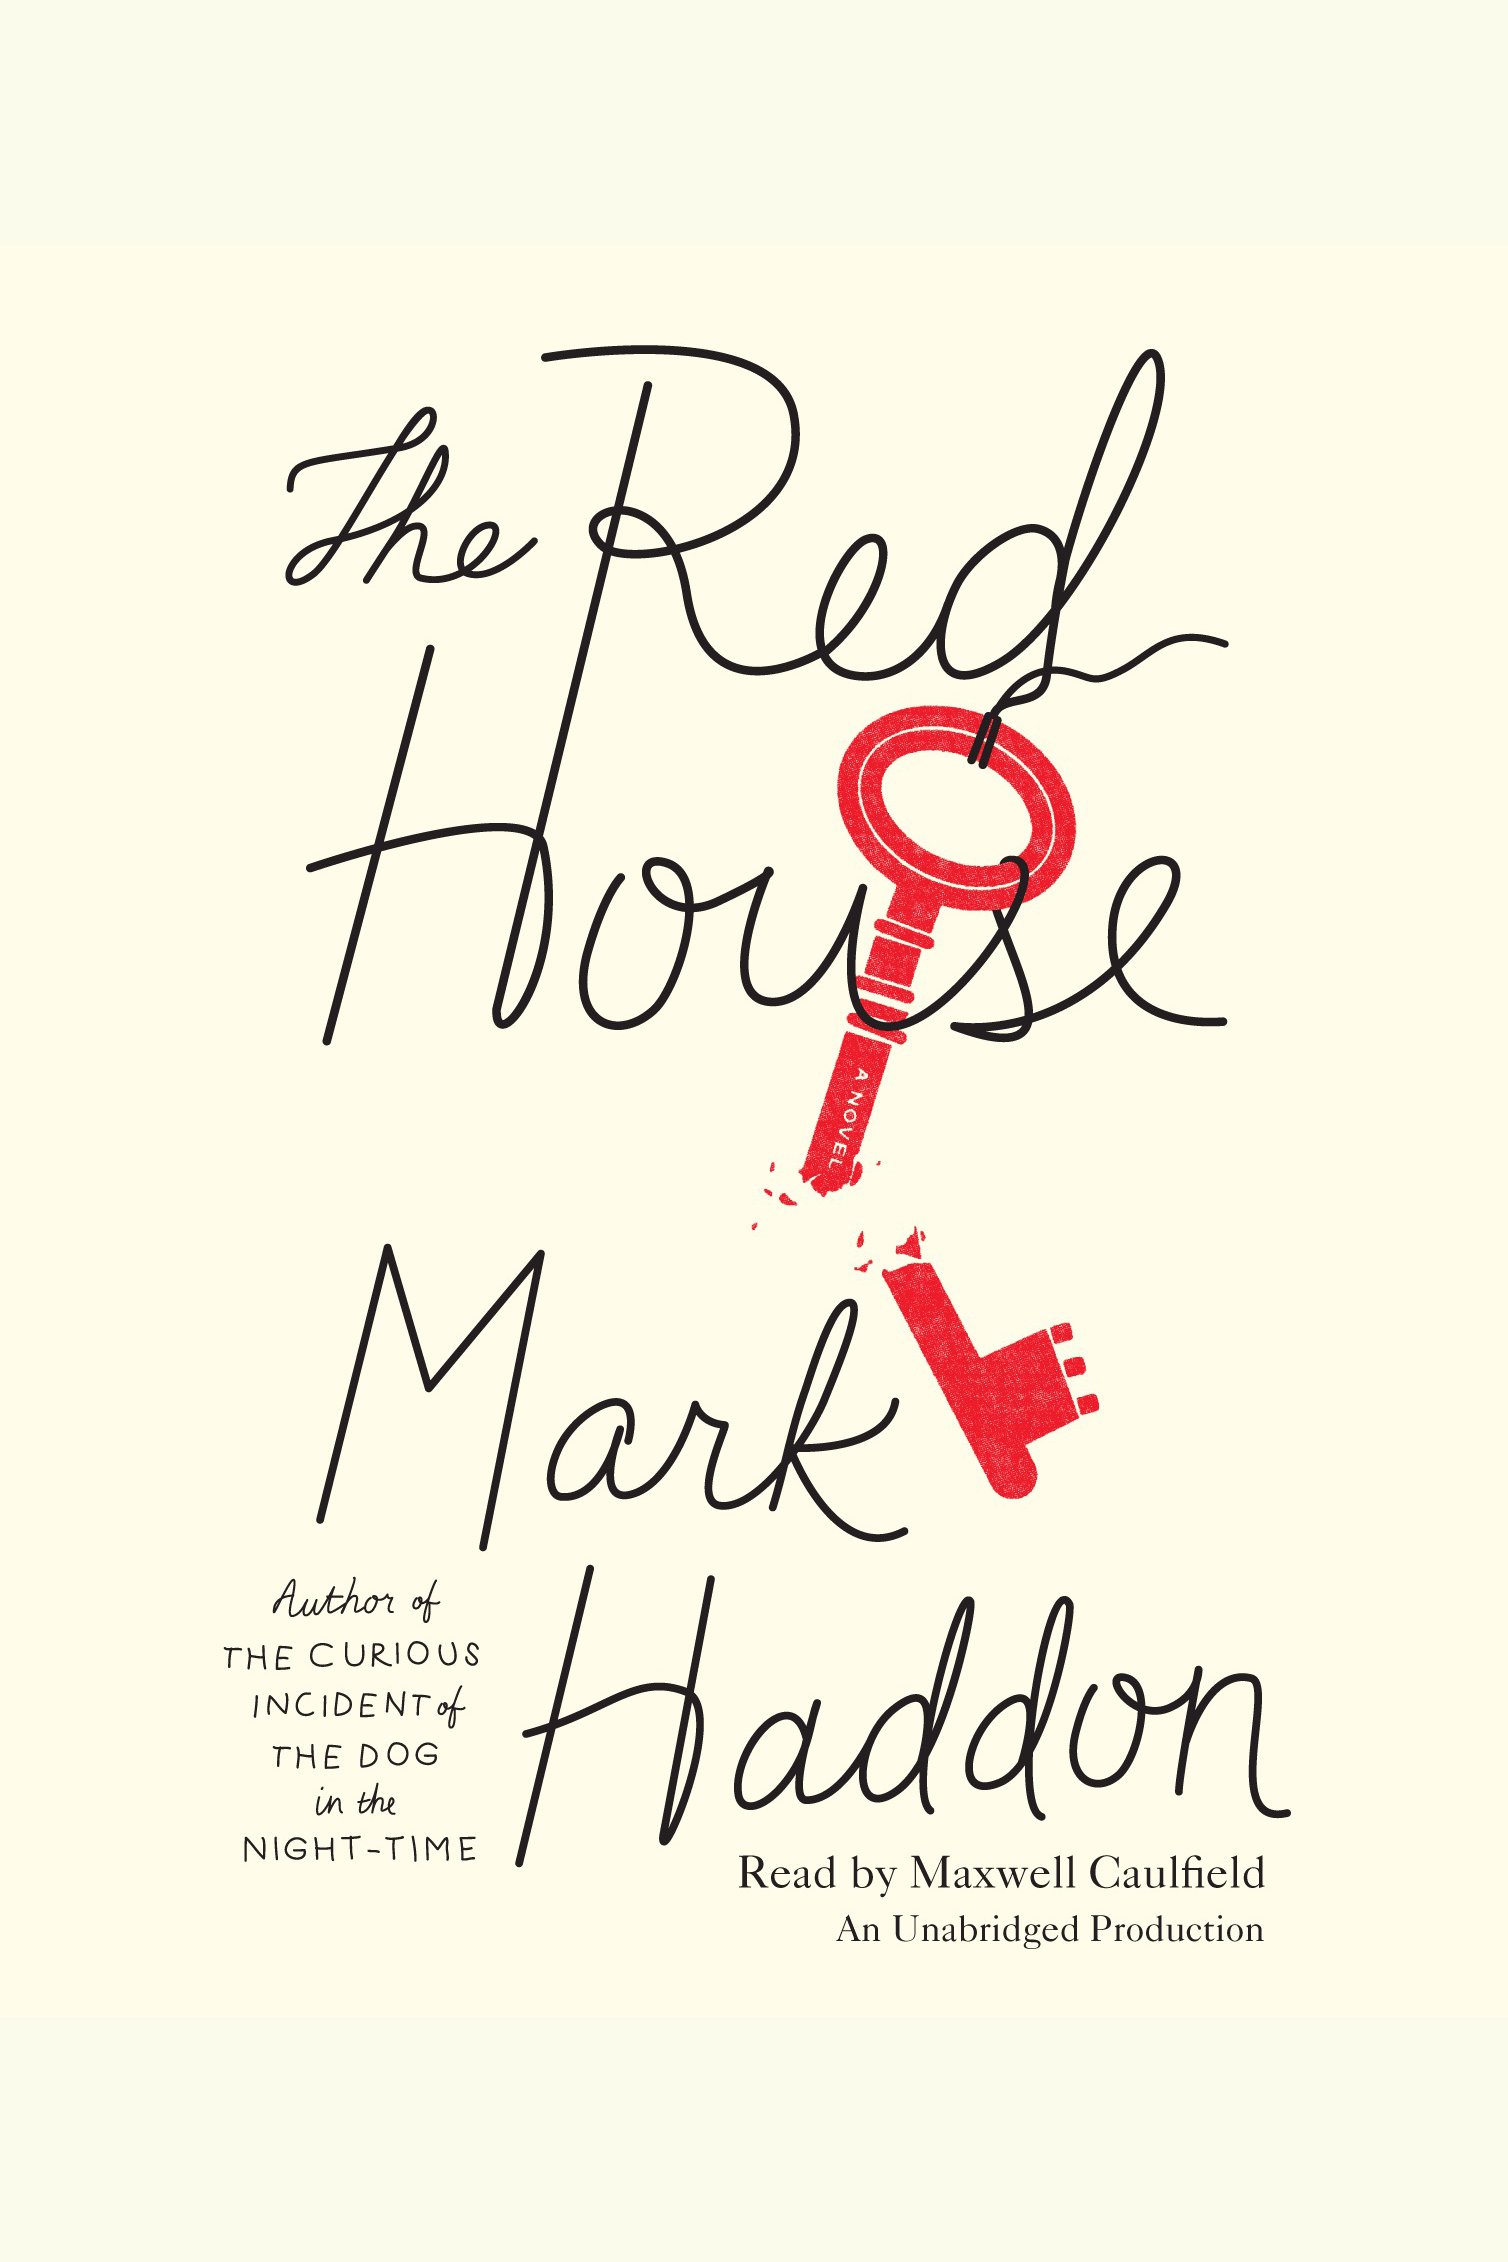 The red house cover image